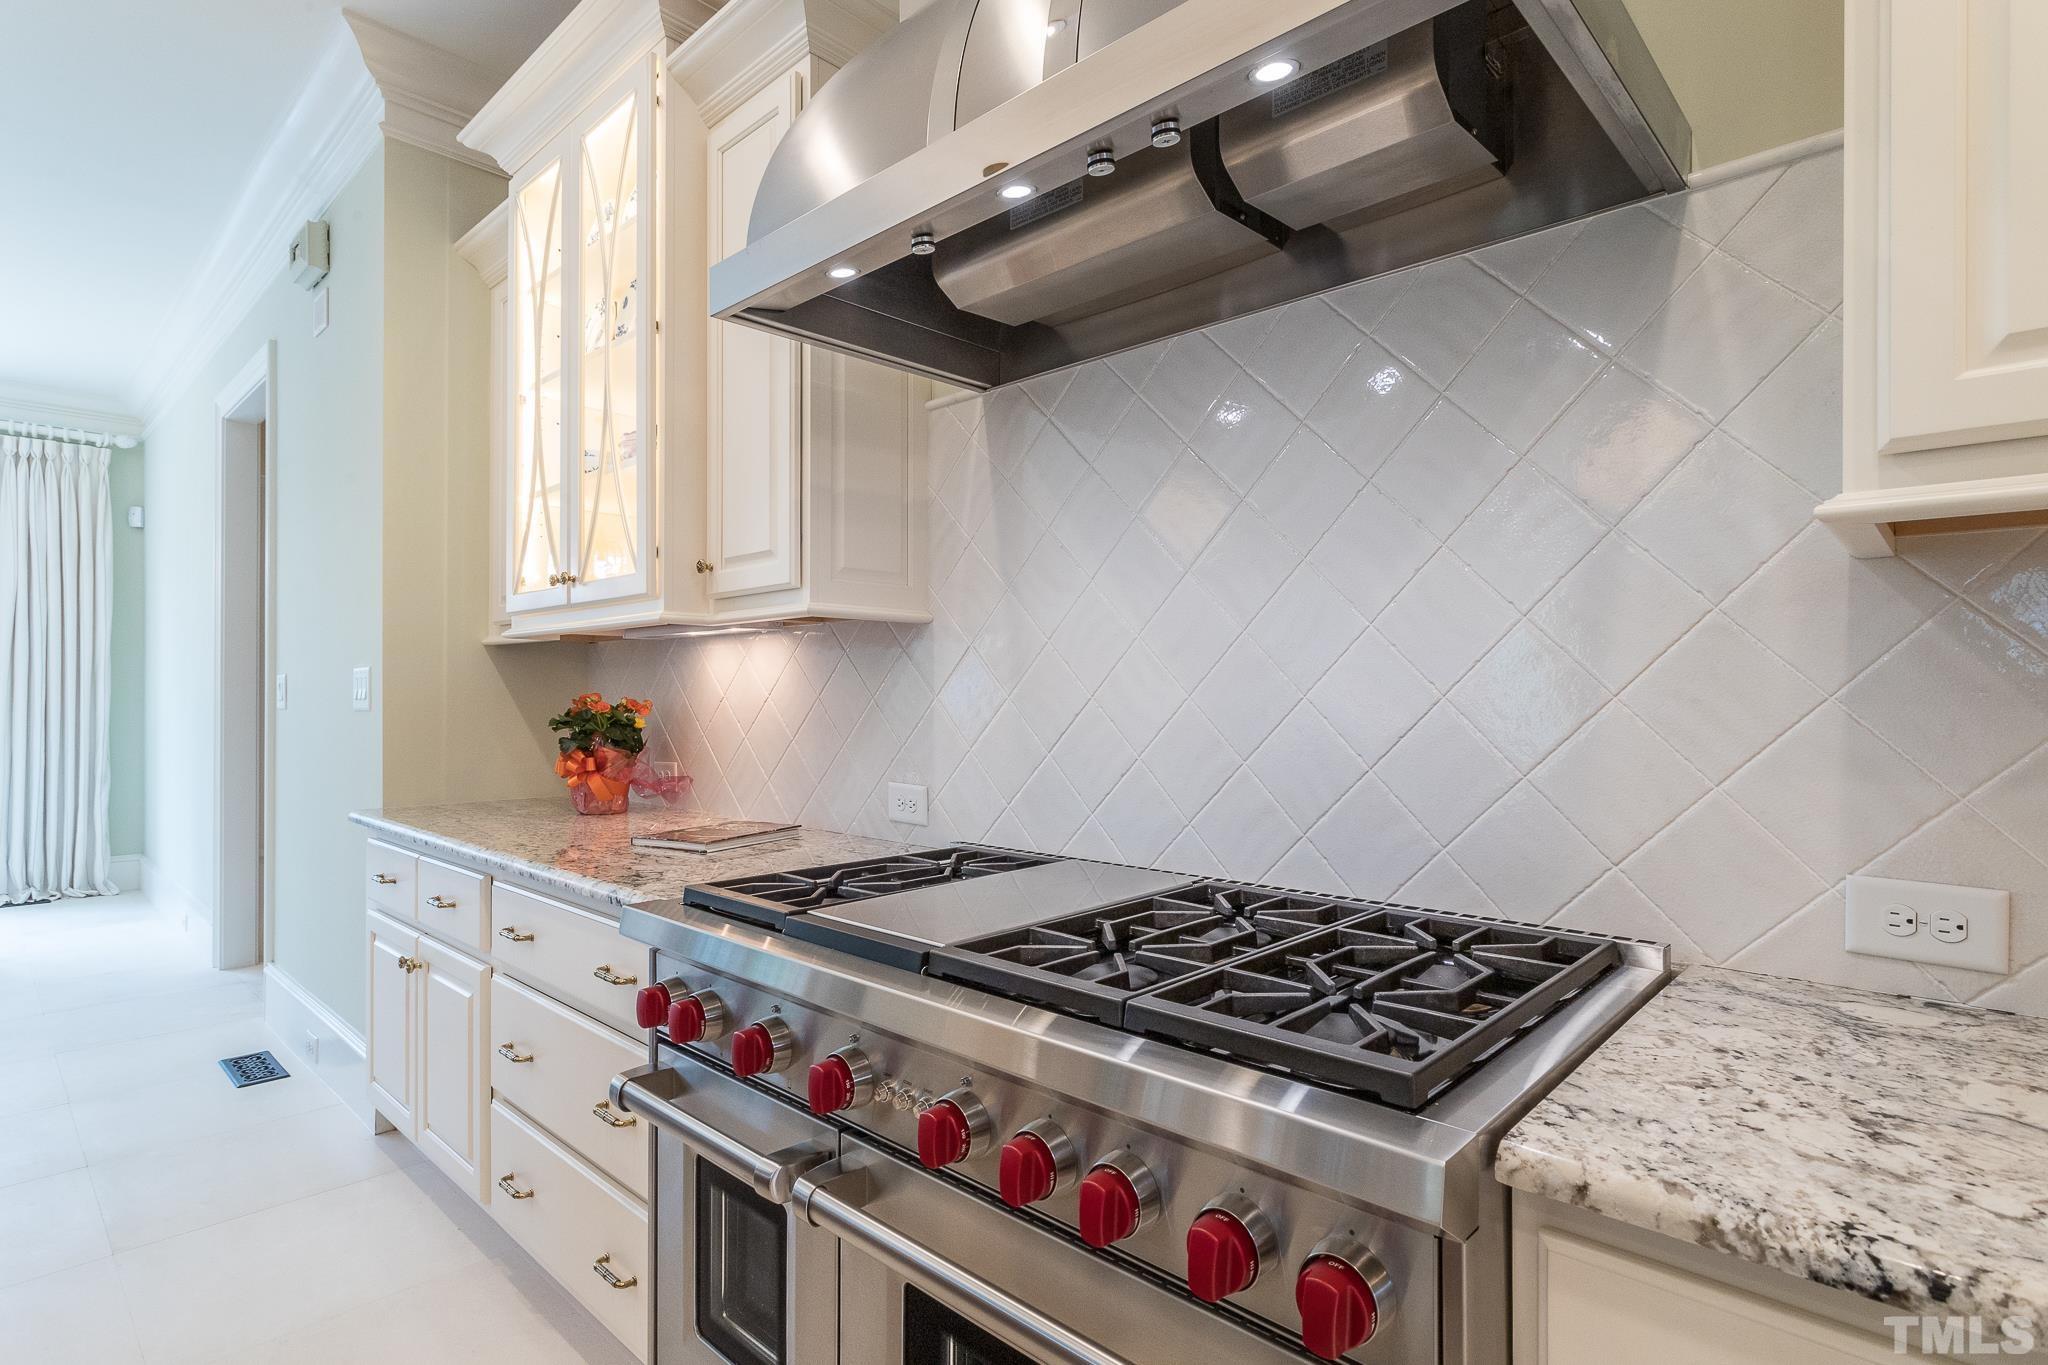 Try out a new recipe or bring in a private chef! This well-appointed kitchen will not disappoint.